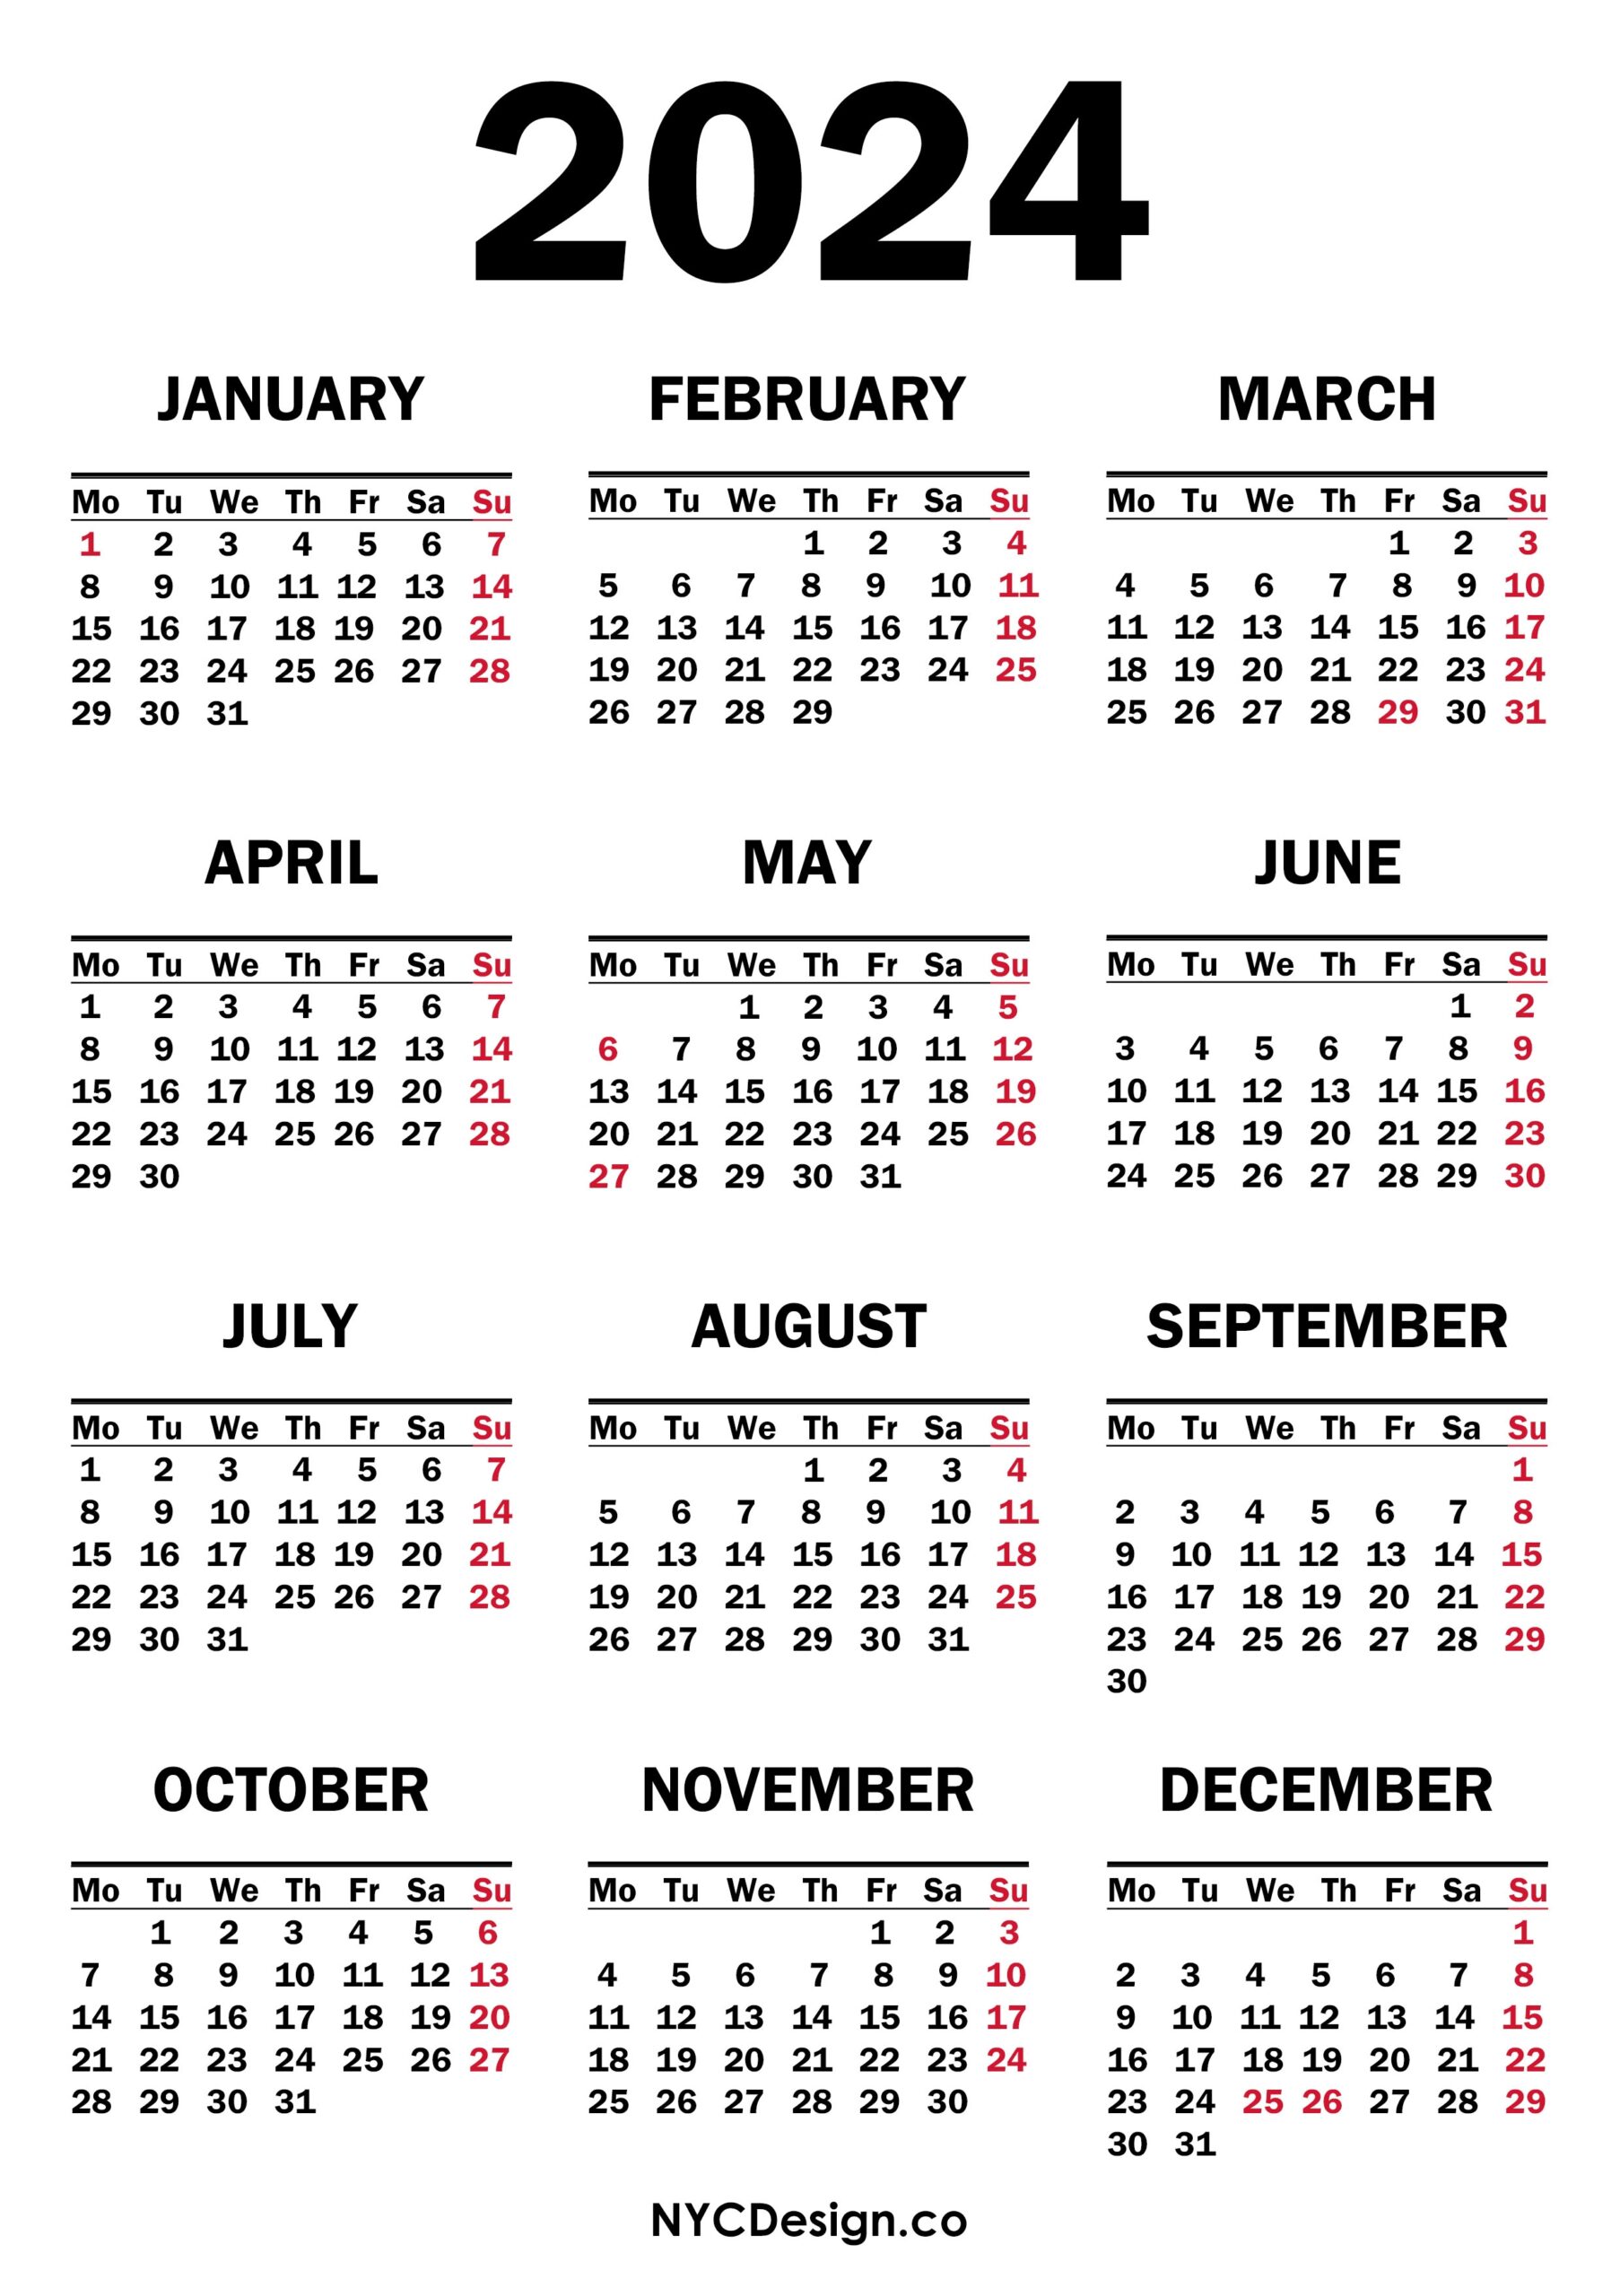 2024 Calendar With Holidays Printable Customize And Print - Free Printable 2024 Calendar With Holidays Waterproof Paper